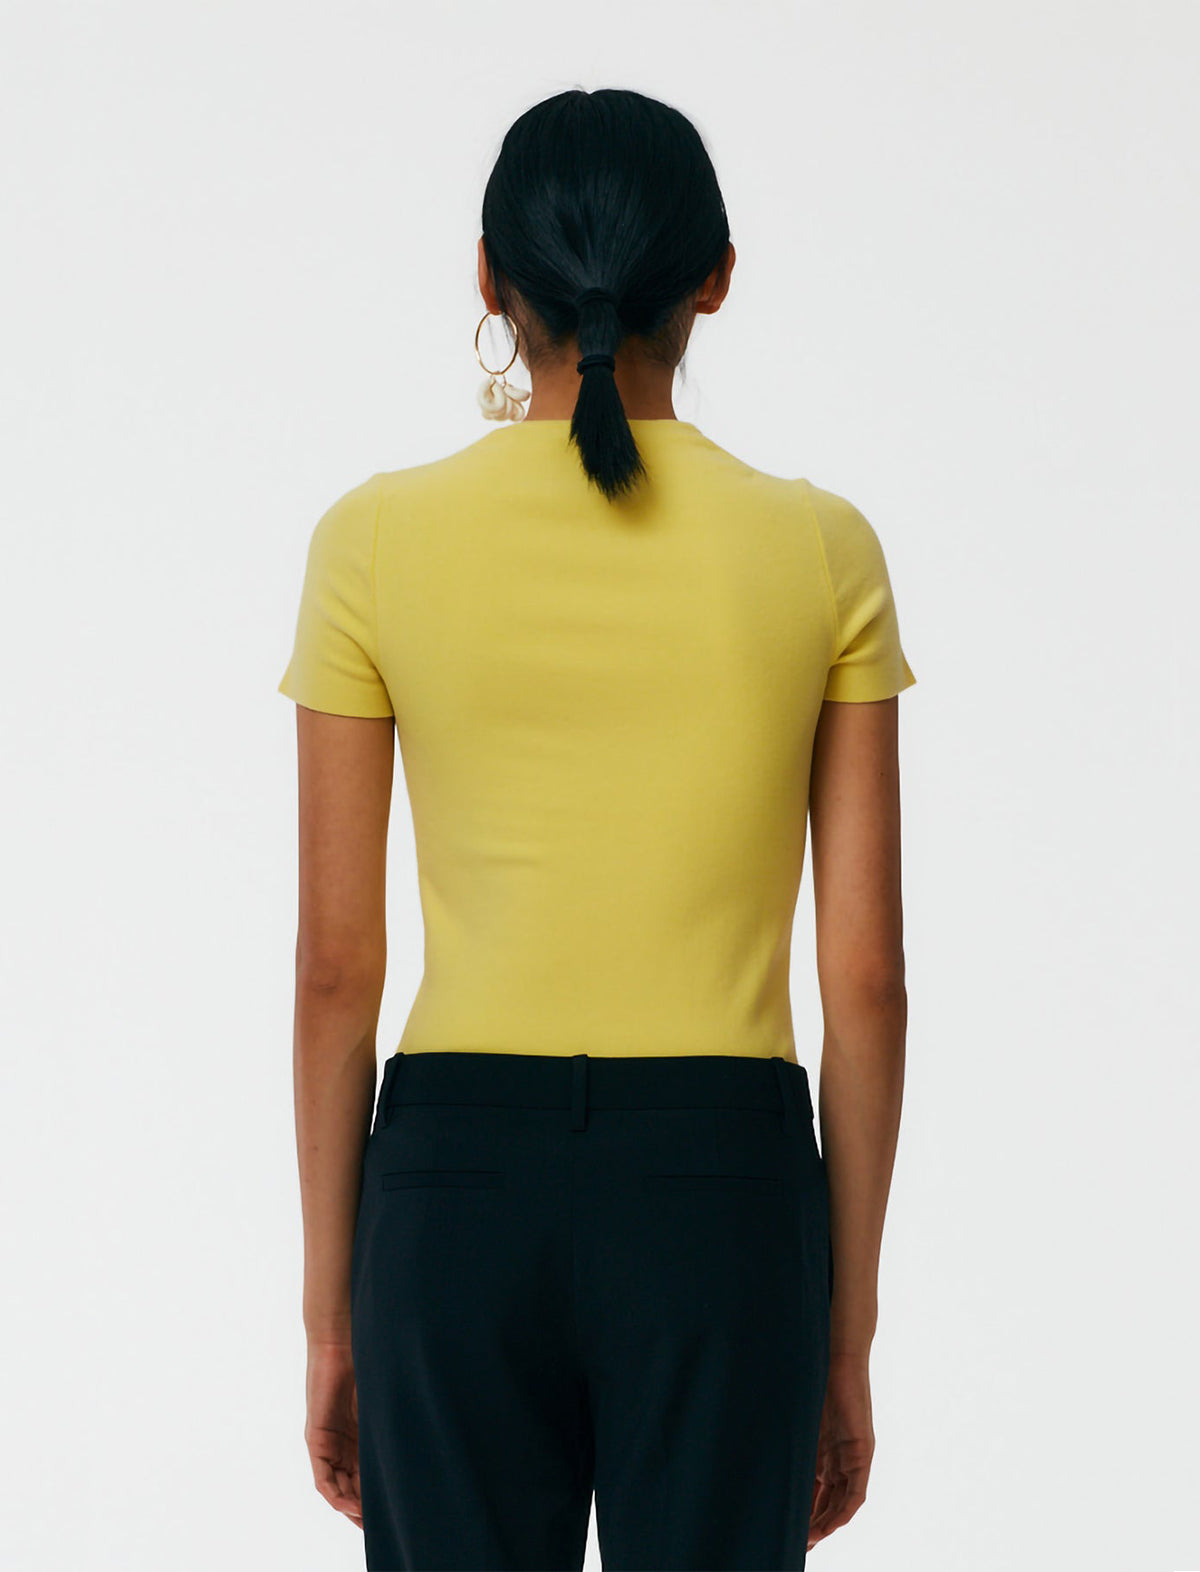 TIBI Compact Stretch Cashmere T-Shirt in Canary Yellow